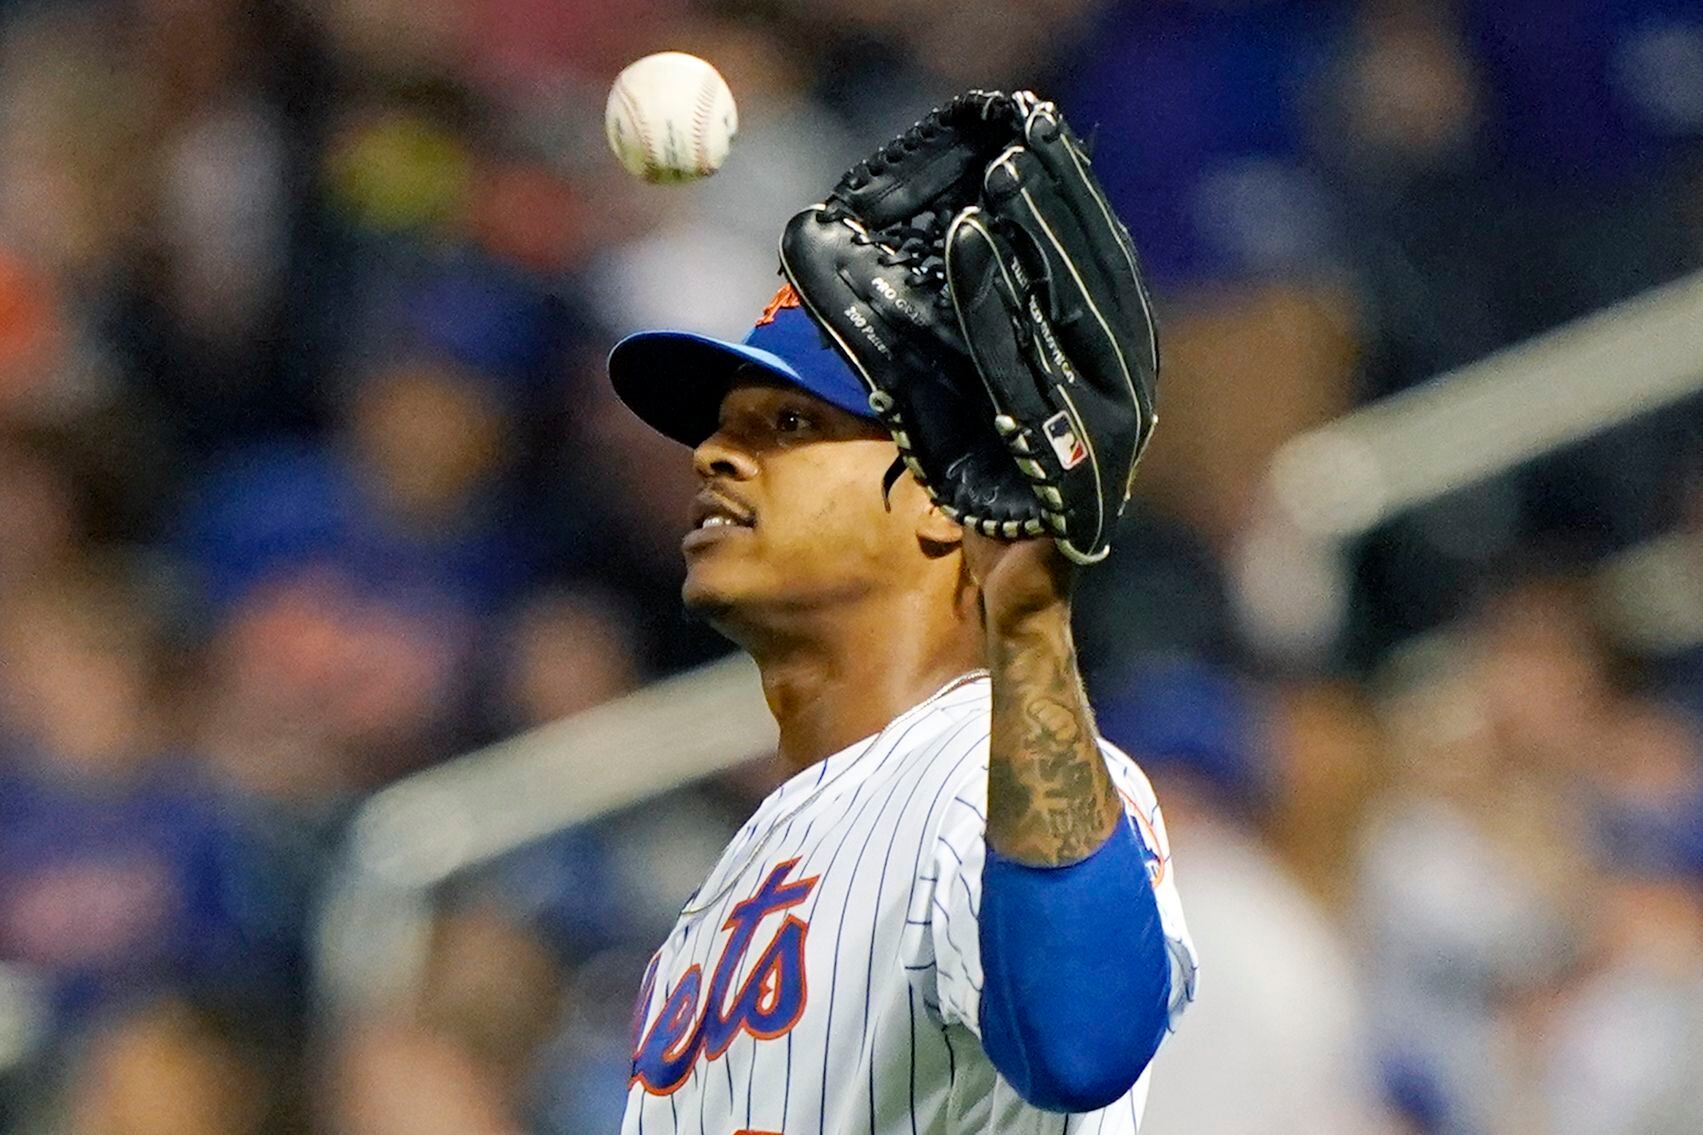 Defense matters for Stroman, MLB's top fielding pitchers